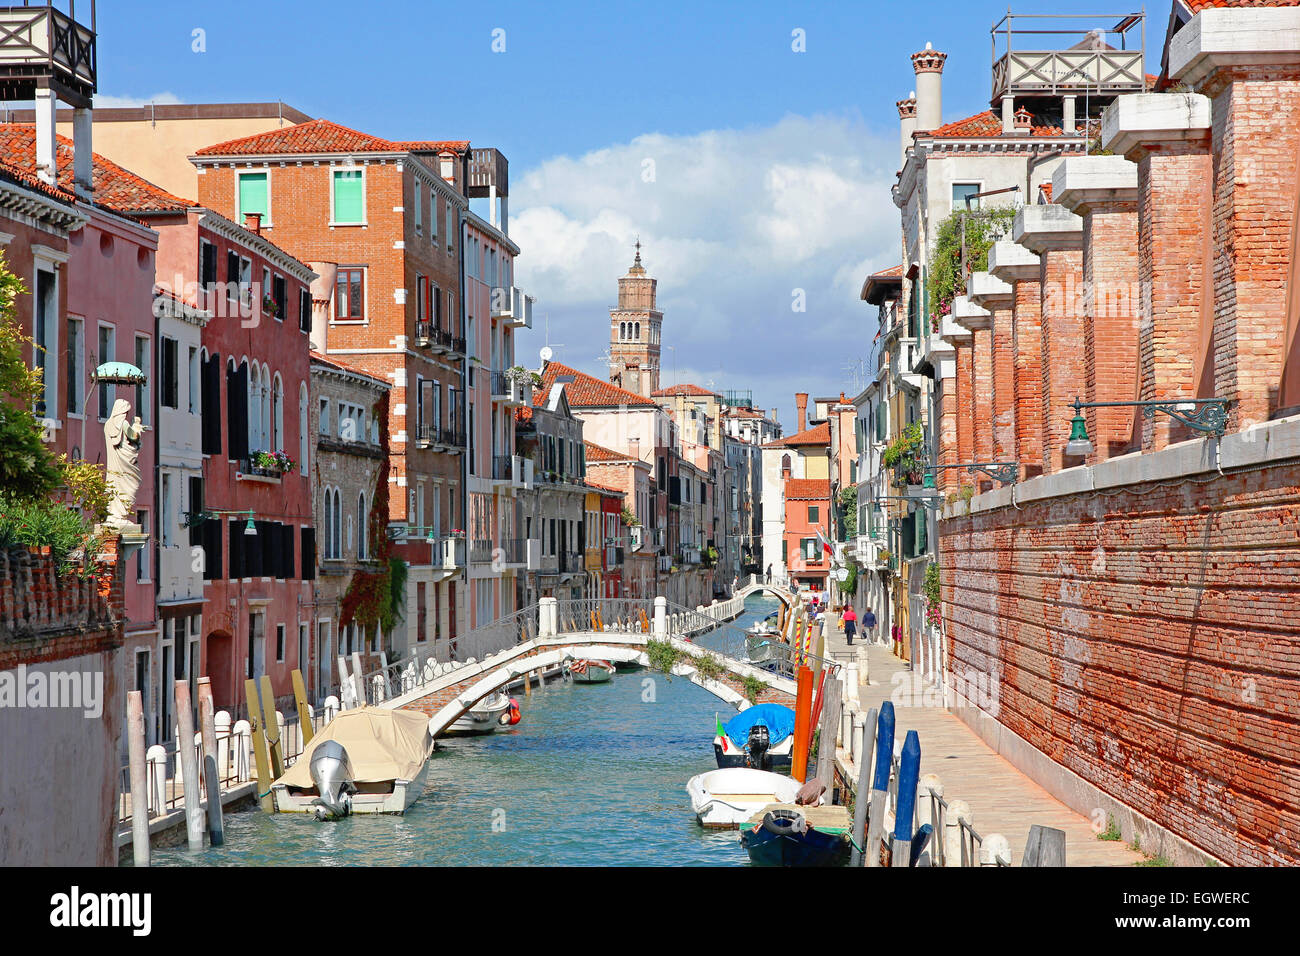 Italy. Venice. Romantic canal with bridge among old colorful houses Stock Photo